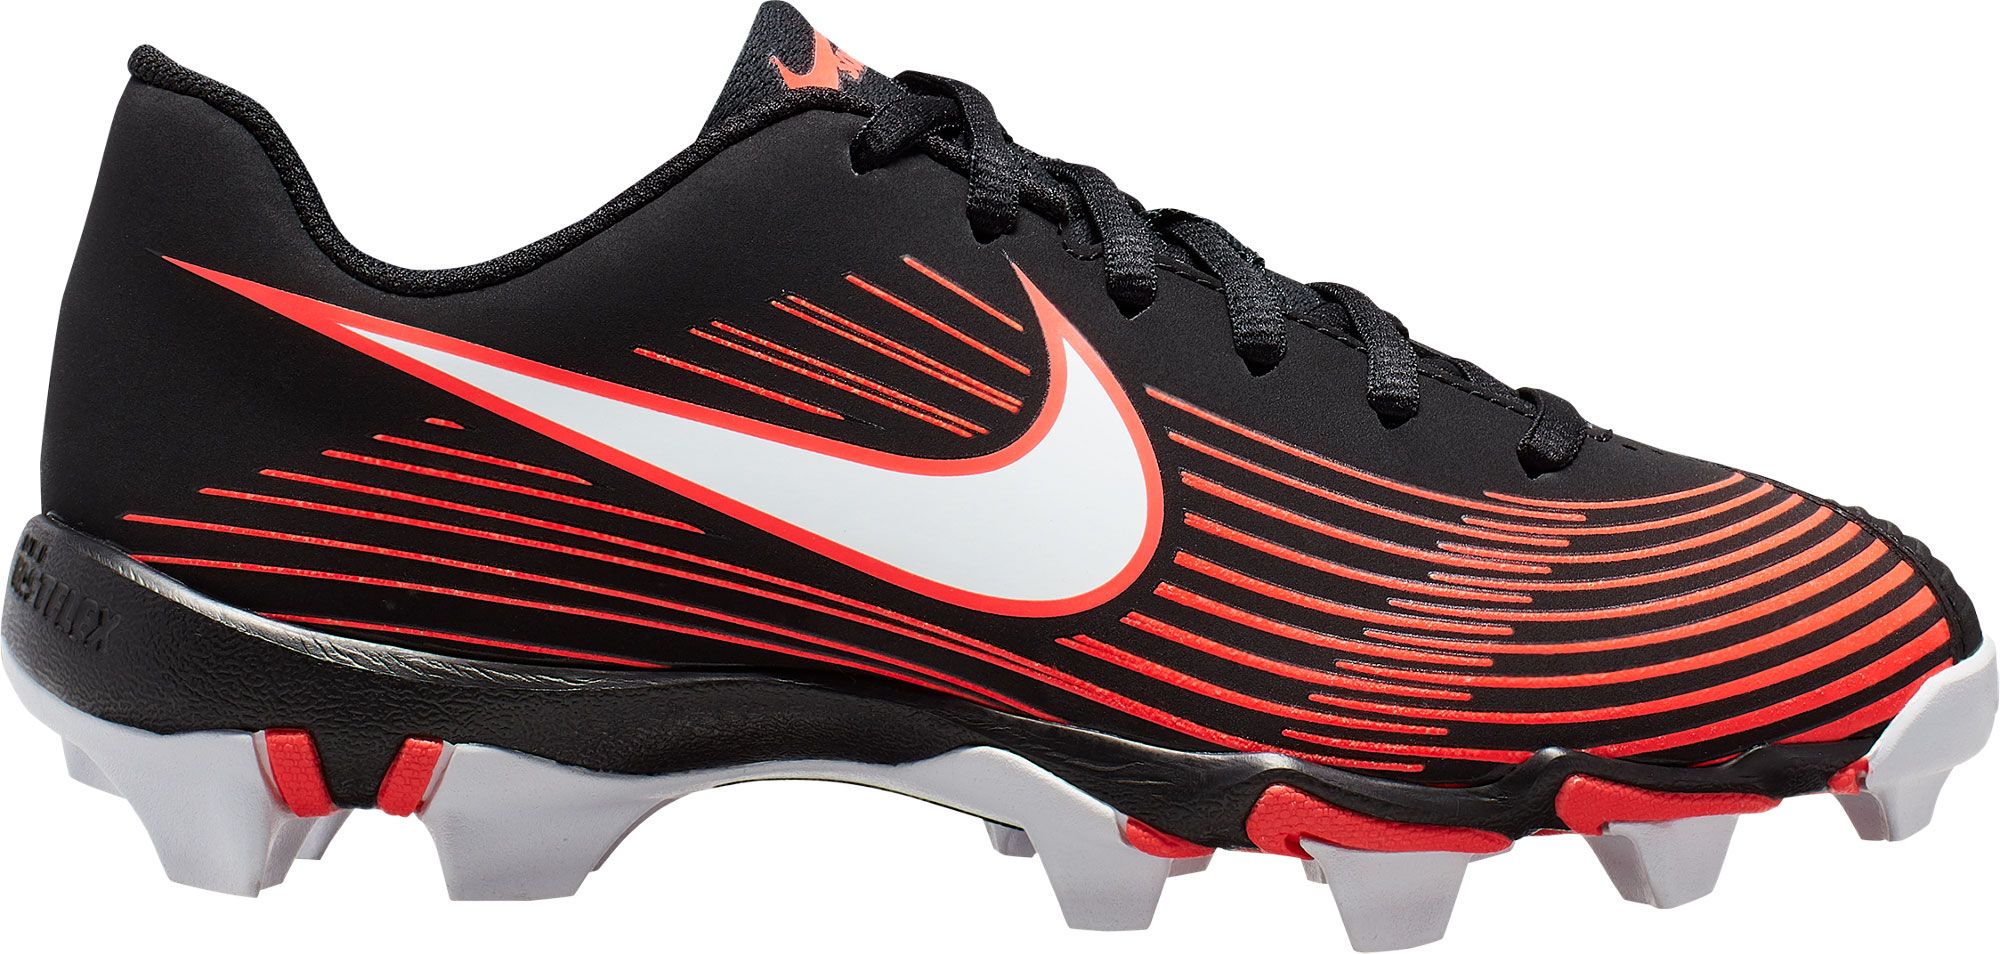 red youth baseball cleats